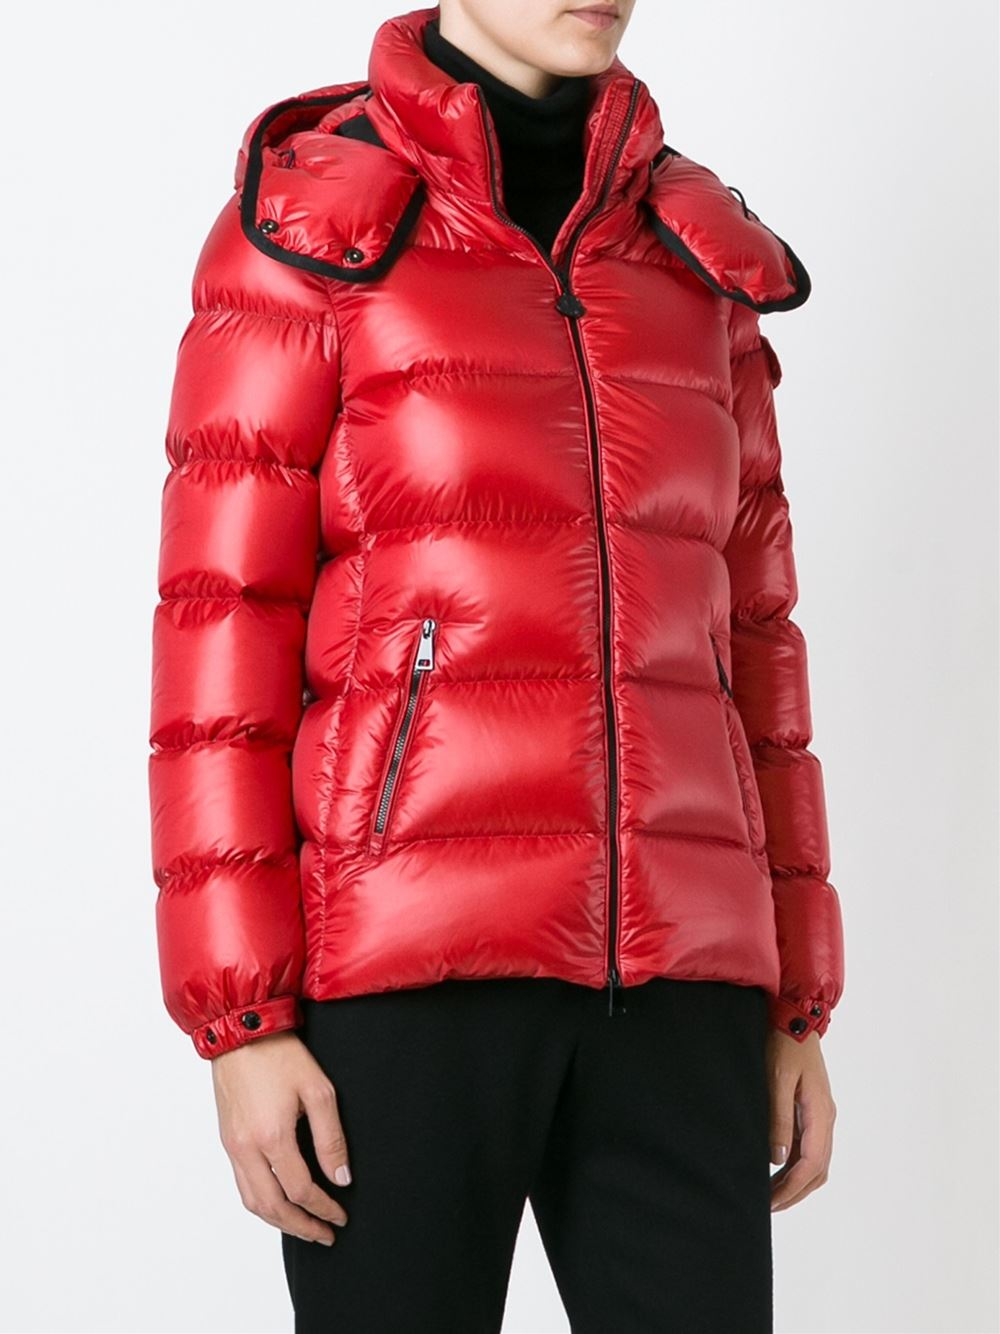 Moncler 'berre' Padded Jacket in Red - Lyst